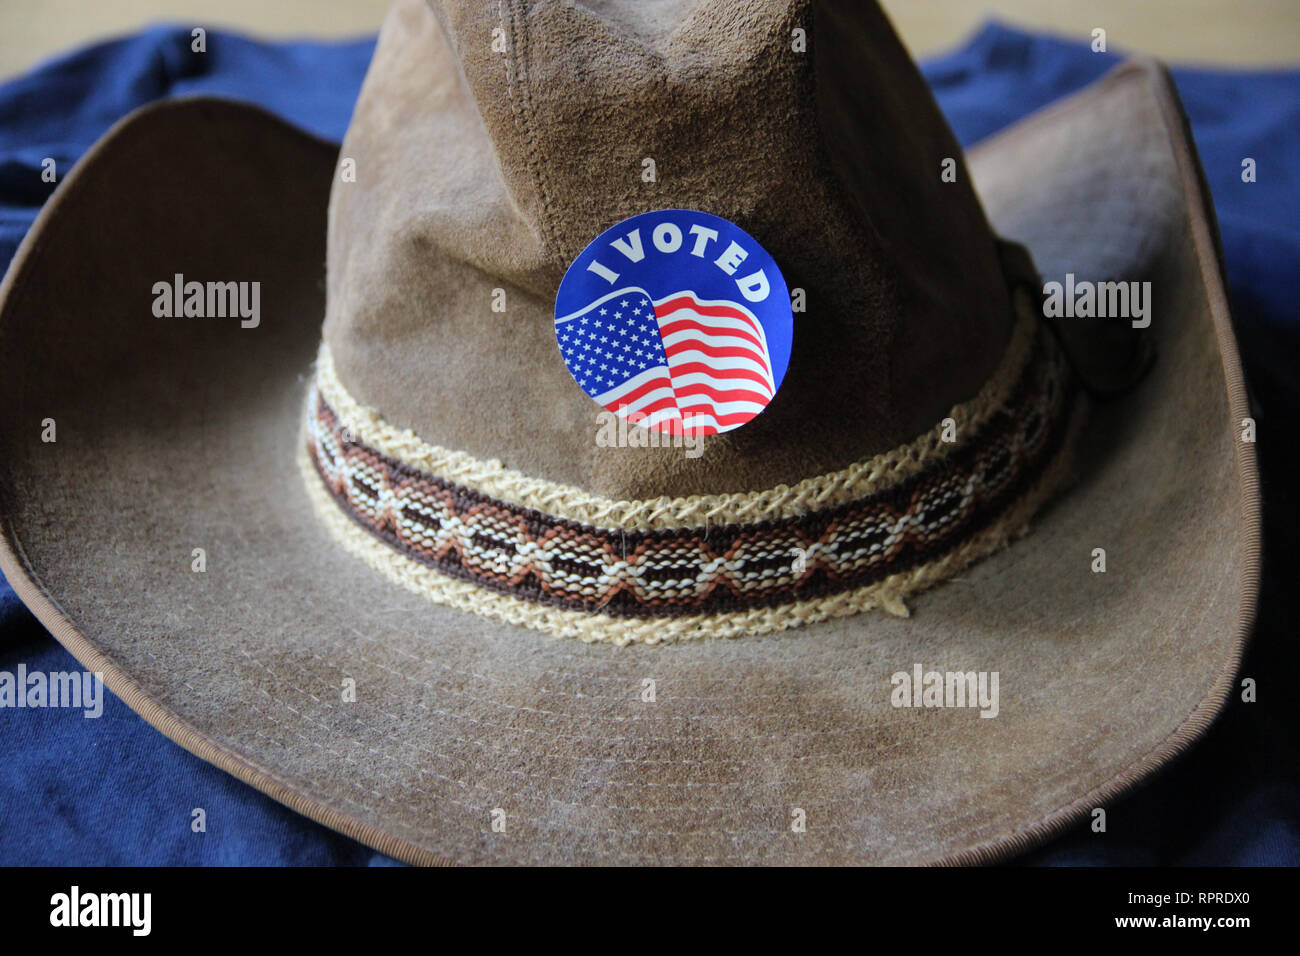 'I Voted' sticker is proudly worn on a cowboy hat after voting in the 2018 election in Texas. Stock Photo